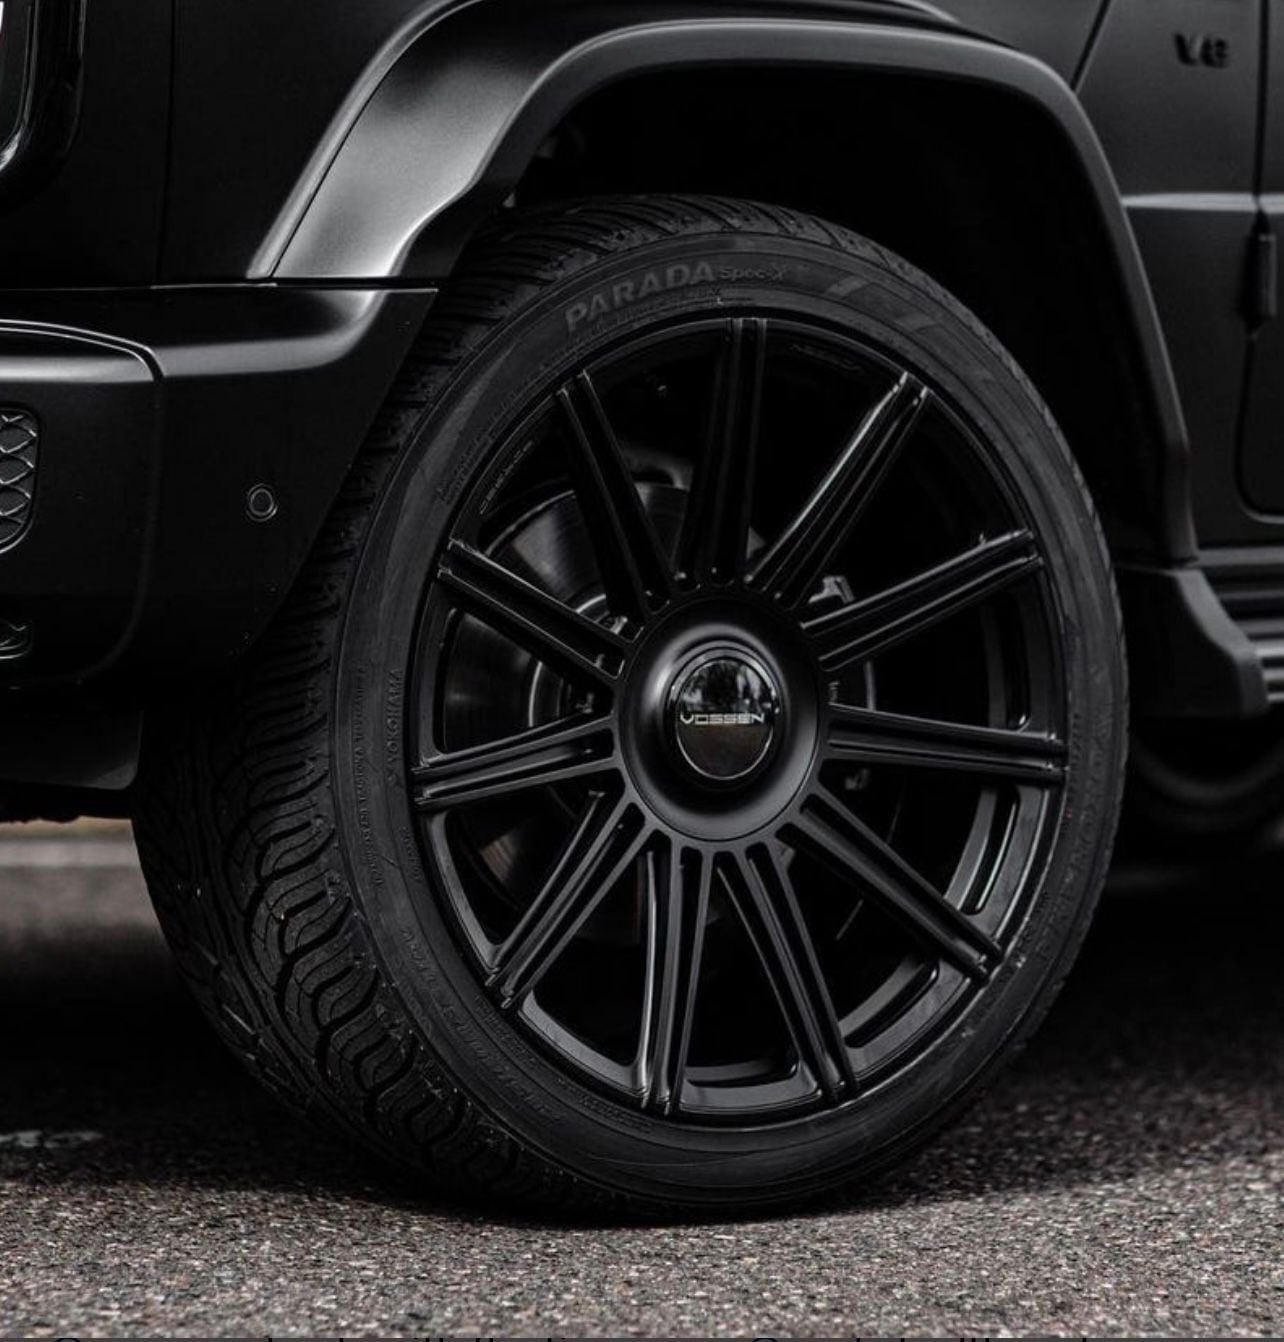 Wheels and Tires/Axles - G550 Vossen 22” S17-12 Wheels/Tires - Used - 2019 to 2022 Mercedes-Benz G-Class - Portland, OR 97005, United States